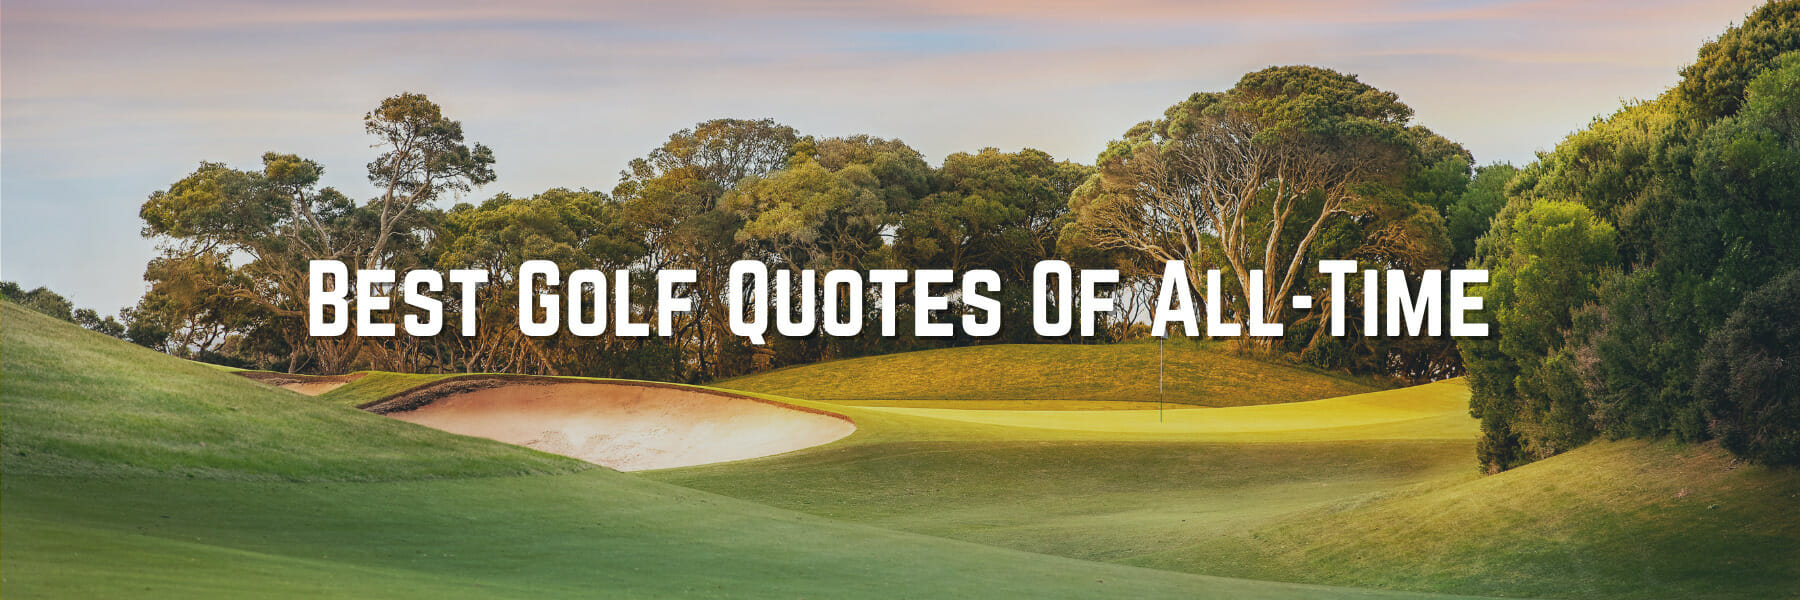 Best Golf Quotes Of All-Time